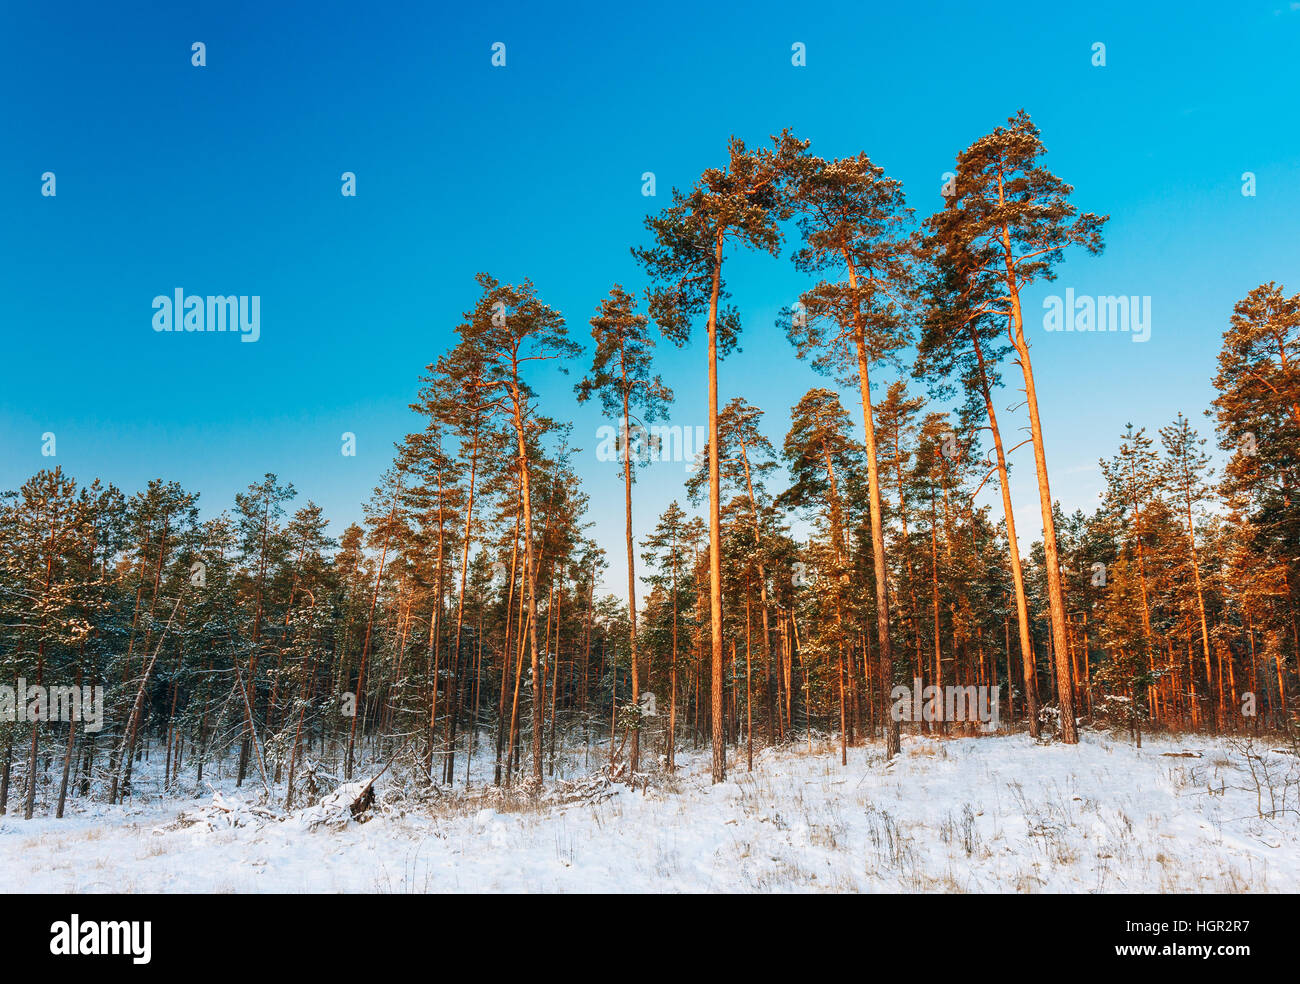 Sunset sunrise in beautiful winter snowy forest. Stock Photo